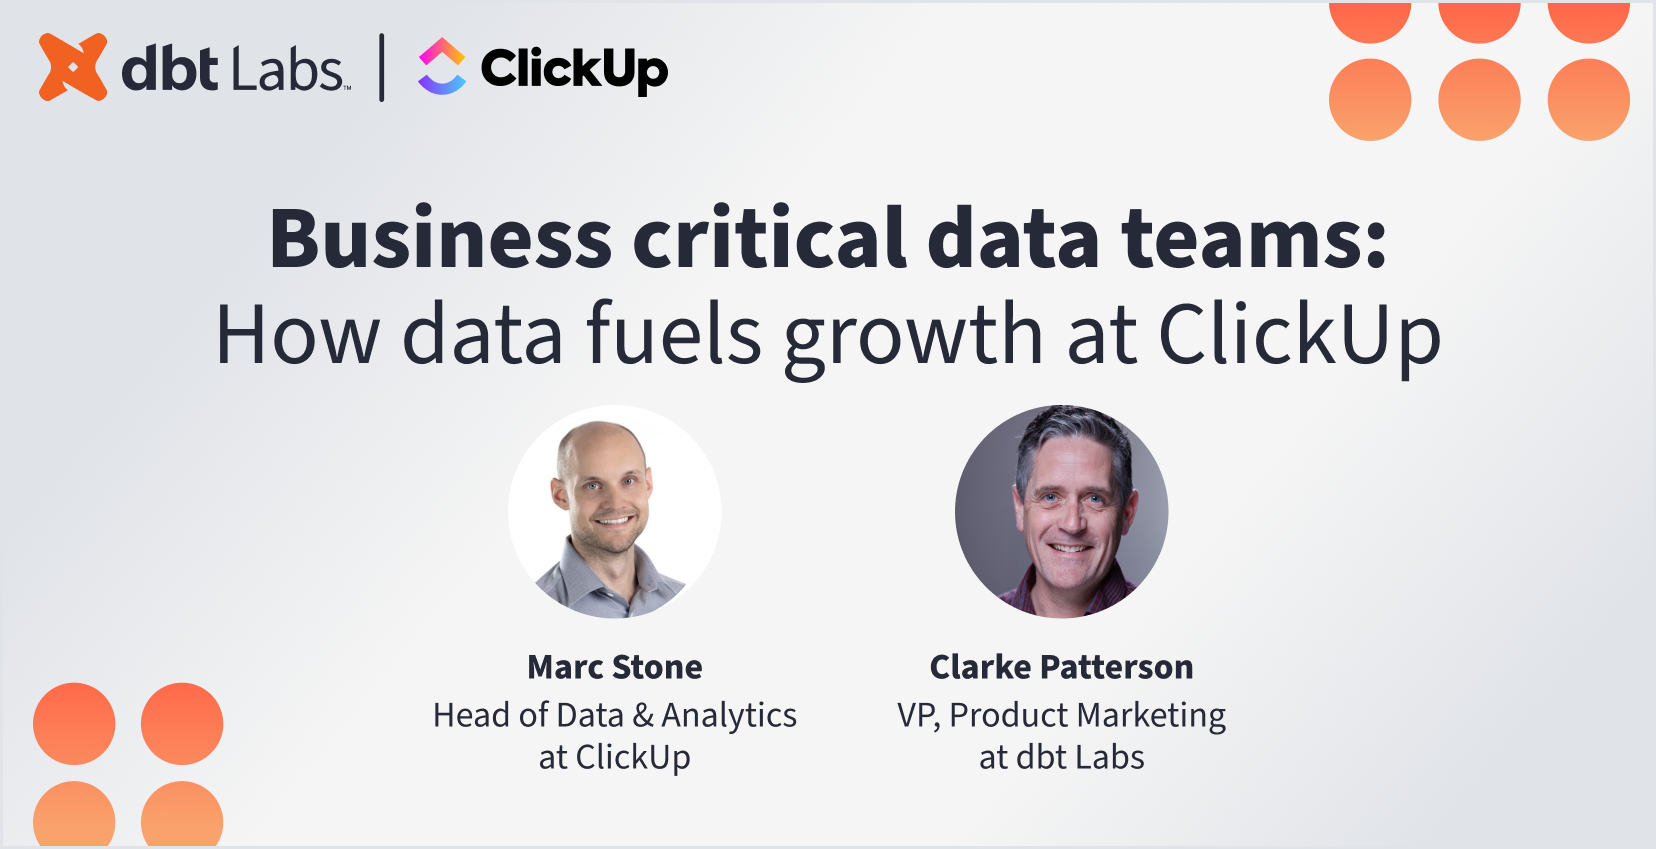 Business critical data teams: How data fuels growth at ClickUp